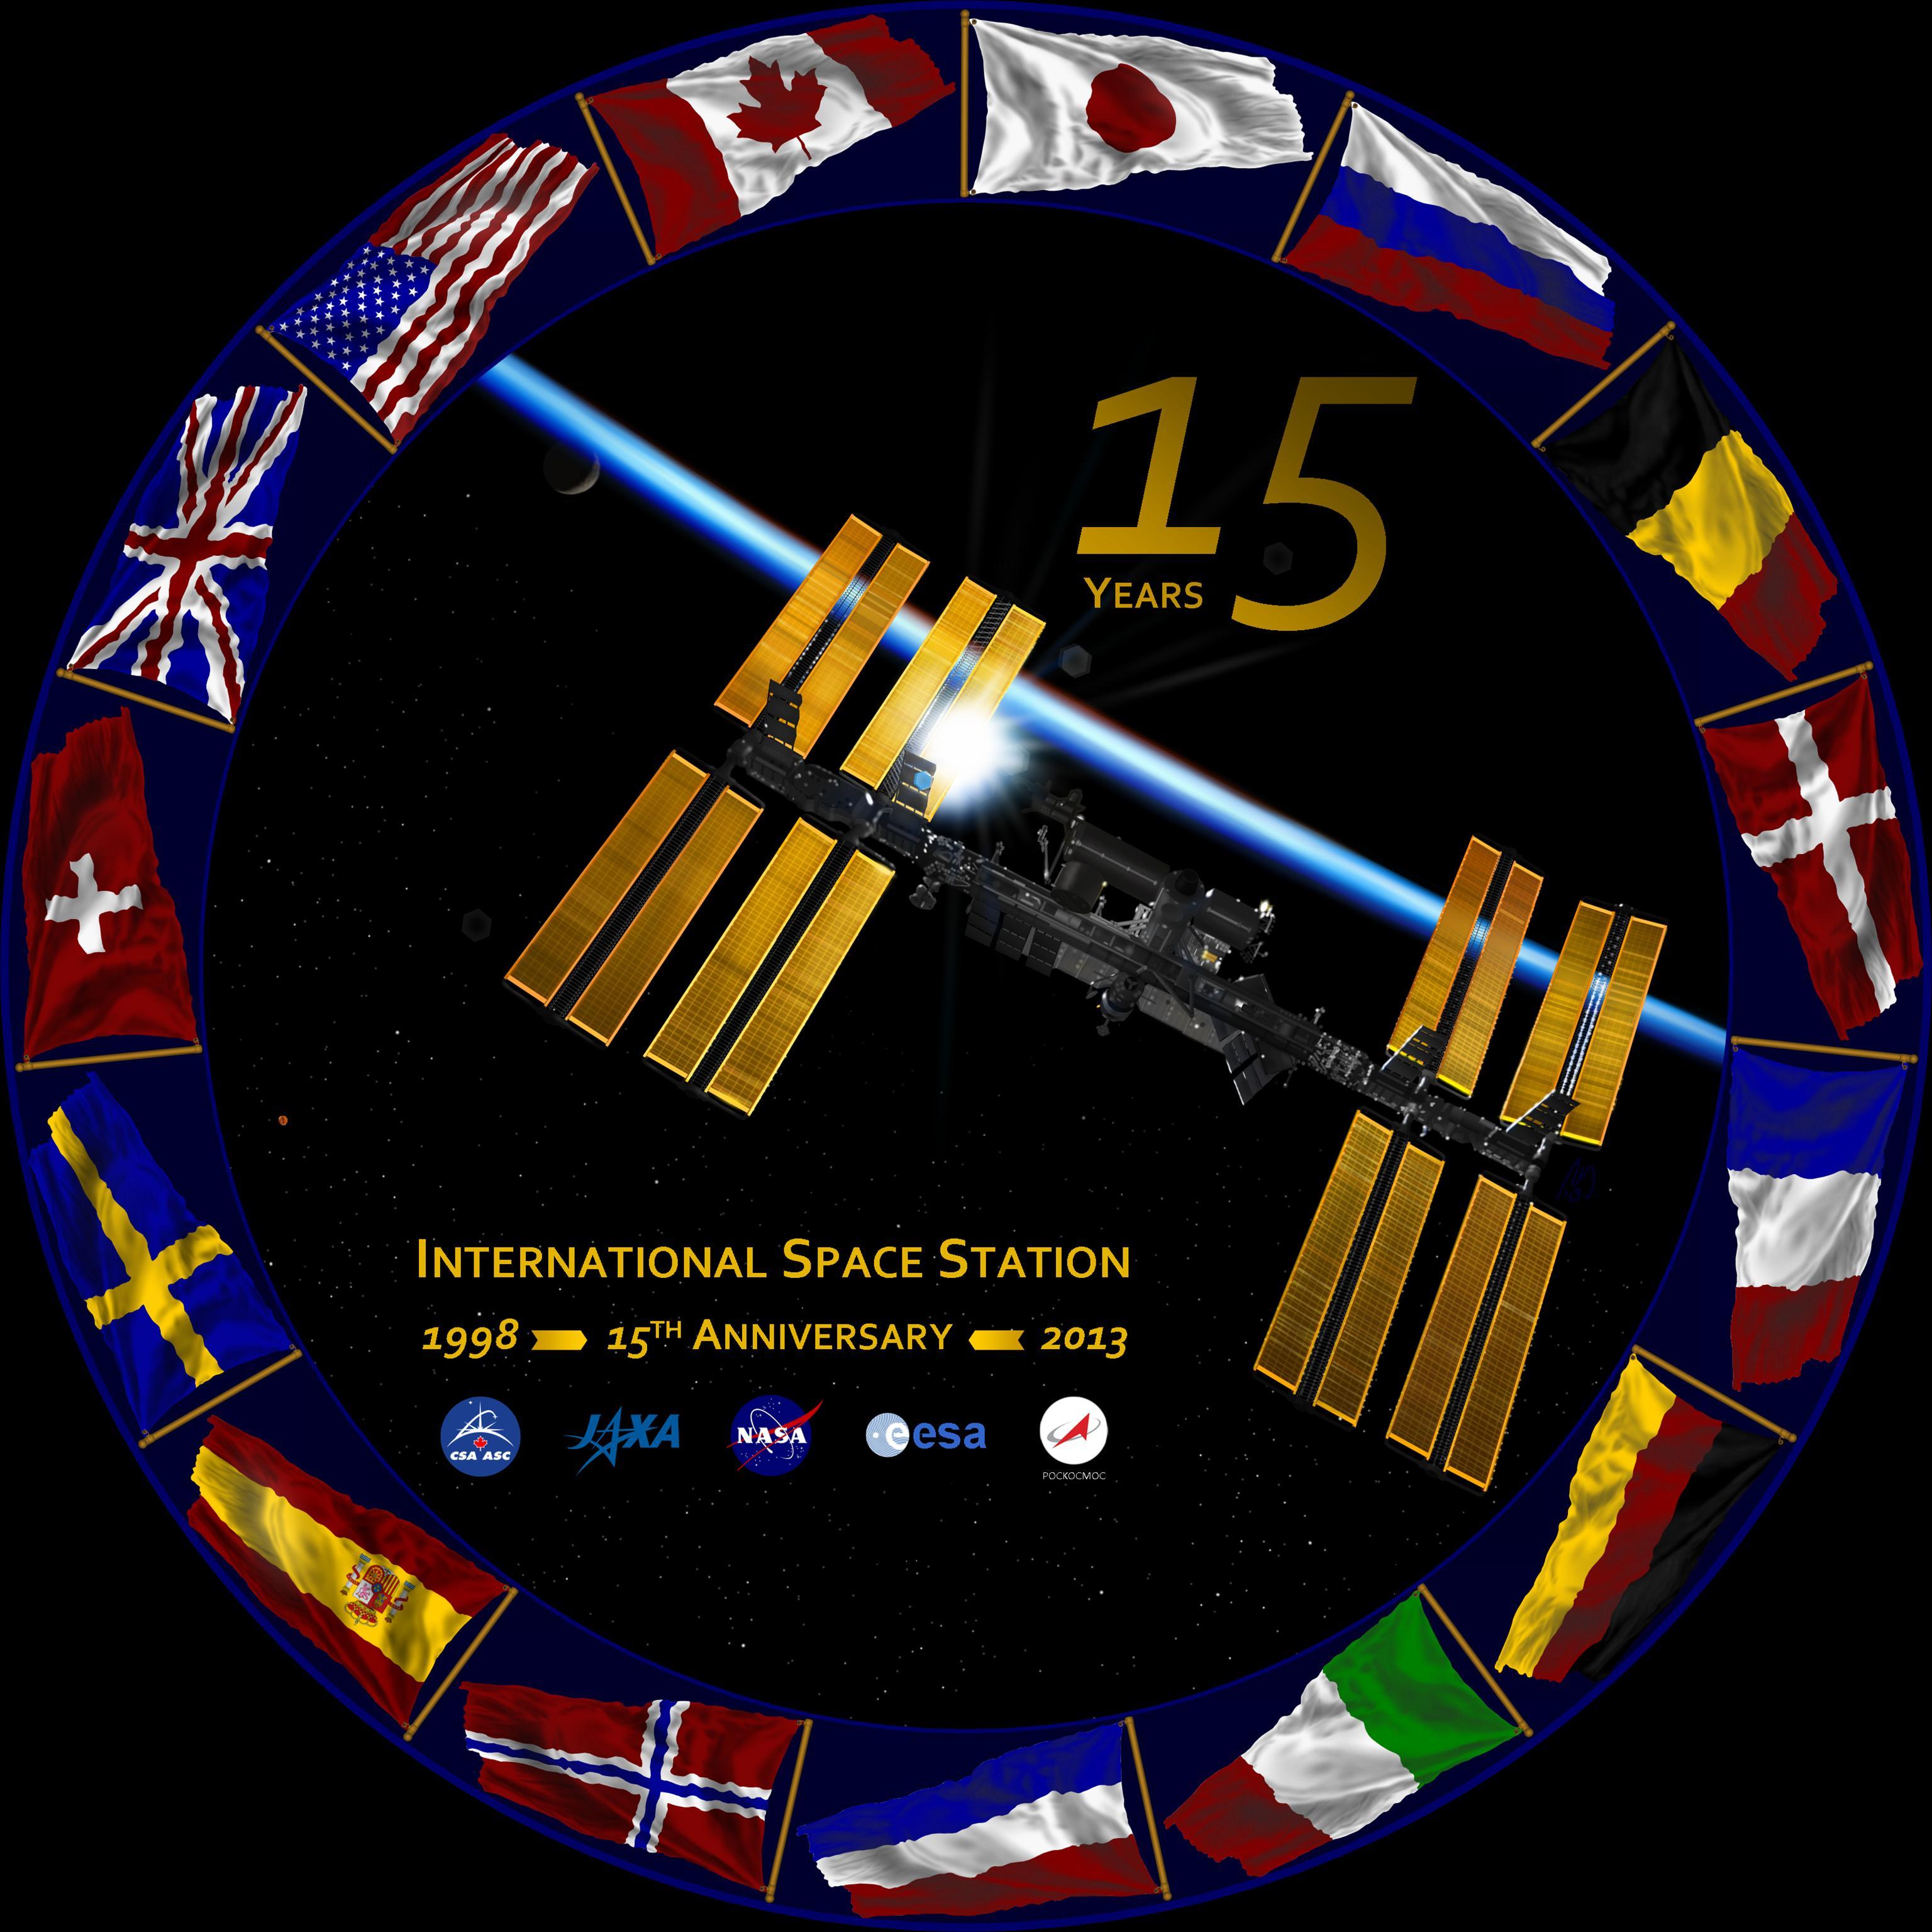 International NASA Logo - JSC Features - Michael C. Jansen: The merging of two passions ...